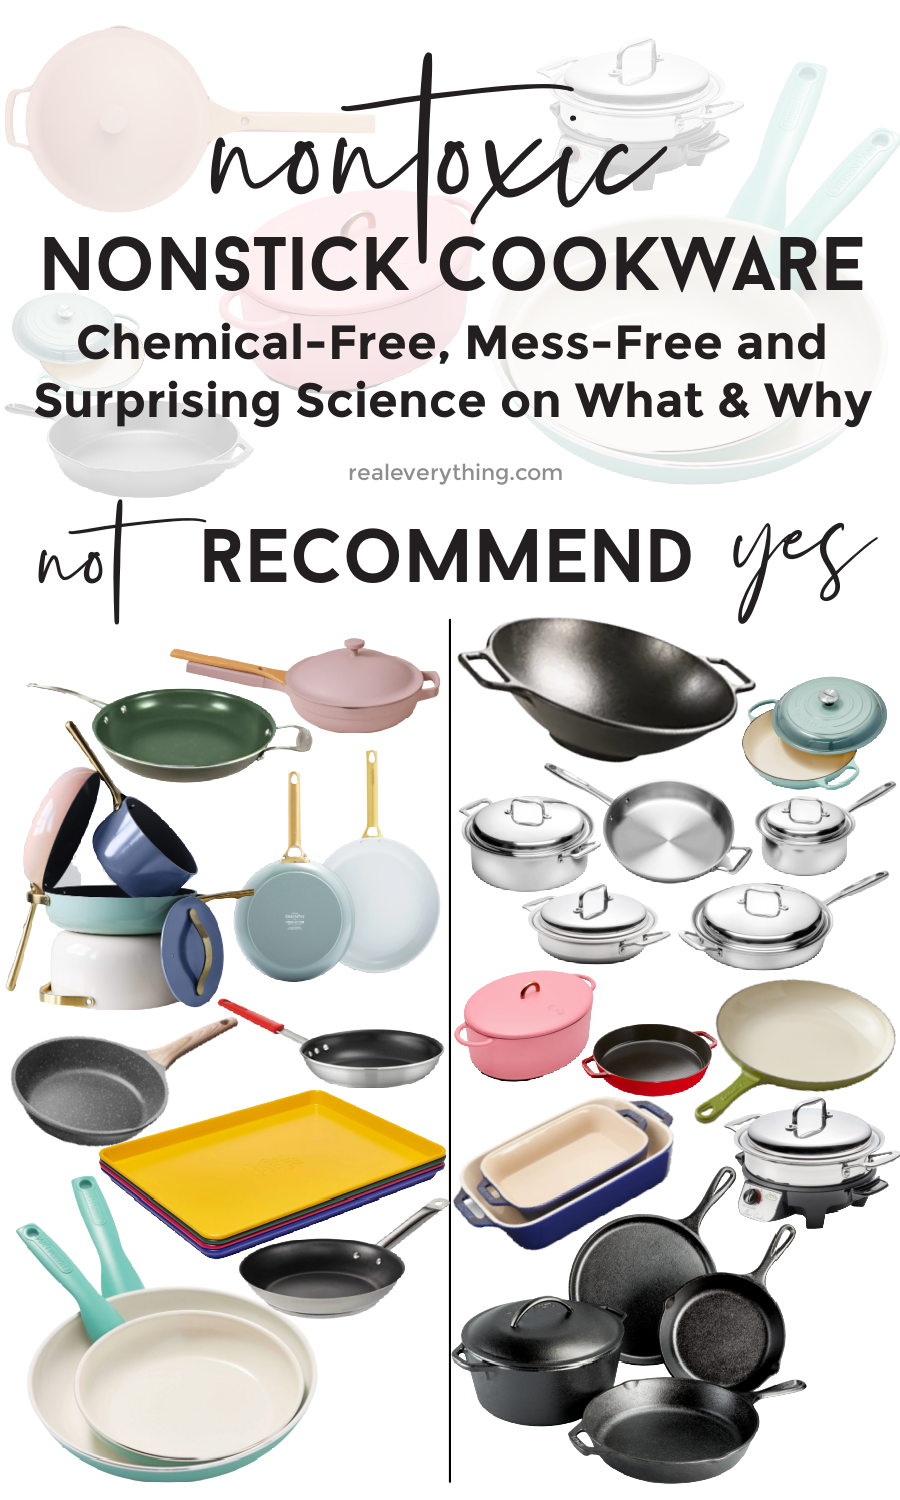 Nontoxic Nonstick Cookware: Chemical-Free, Mess-Free Pots and Pans - Real  Everything